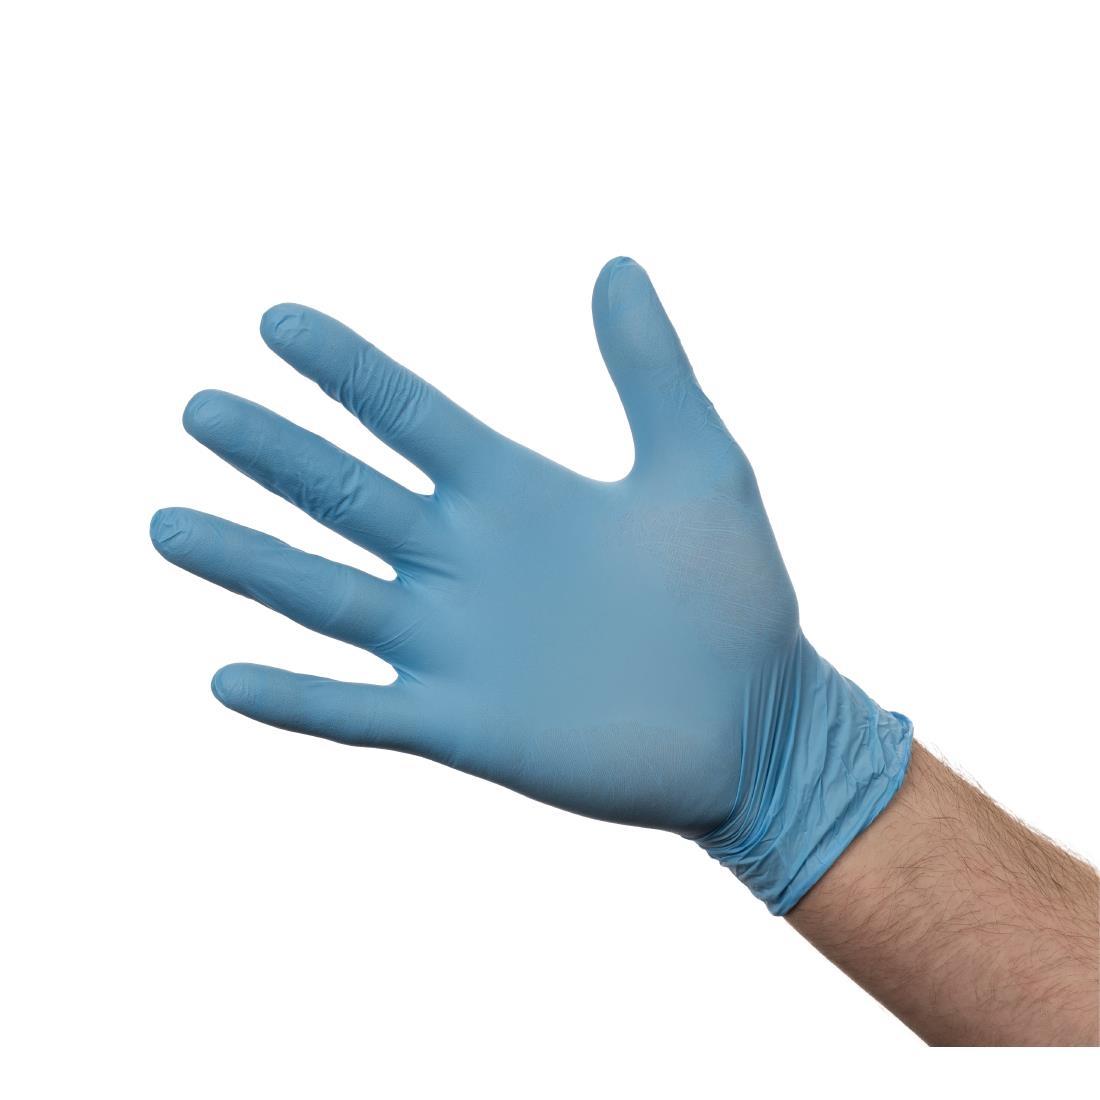 Powder-Free Nitrile Gloves Blue Extra Large (Pack of 100) - Y478-XL  - 1